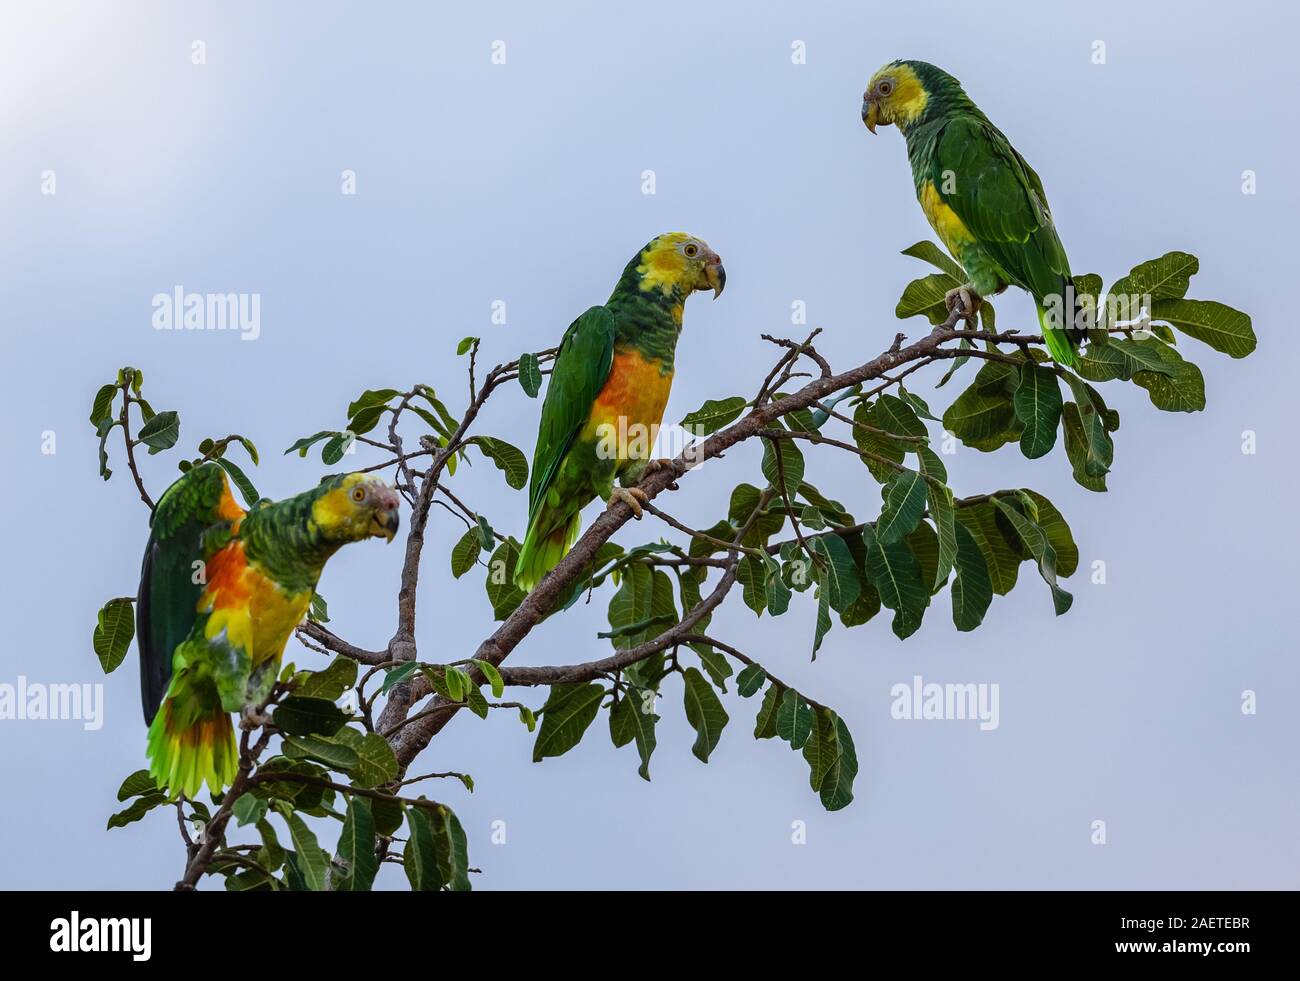 Yellow-faced Parrots (Alipiopsitta xanthops) on their roost. Tocantins, Brazil, South America. Stock Photo